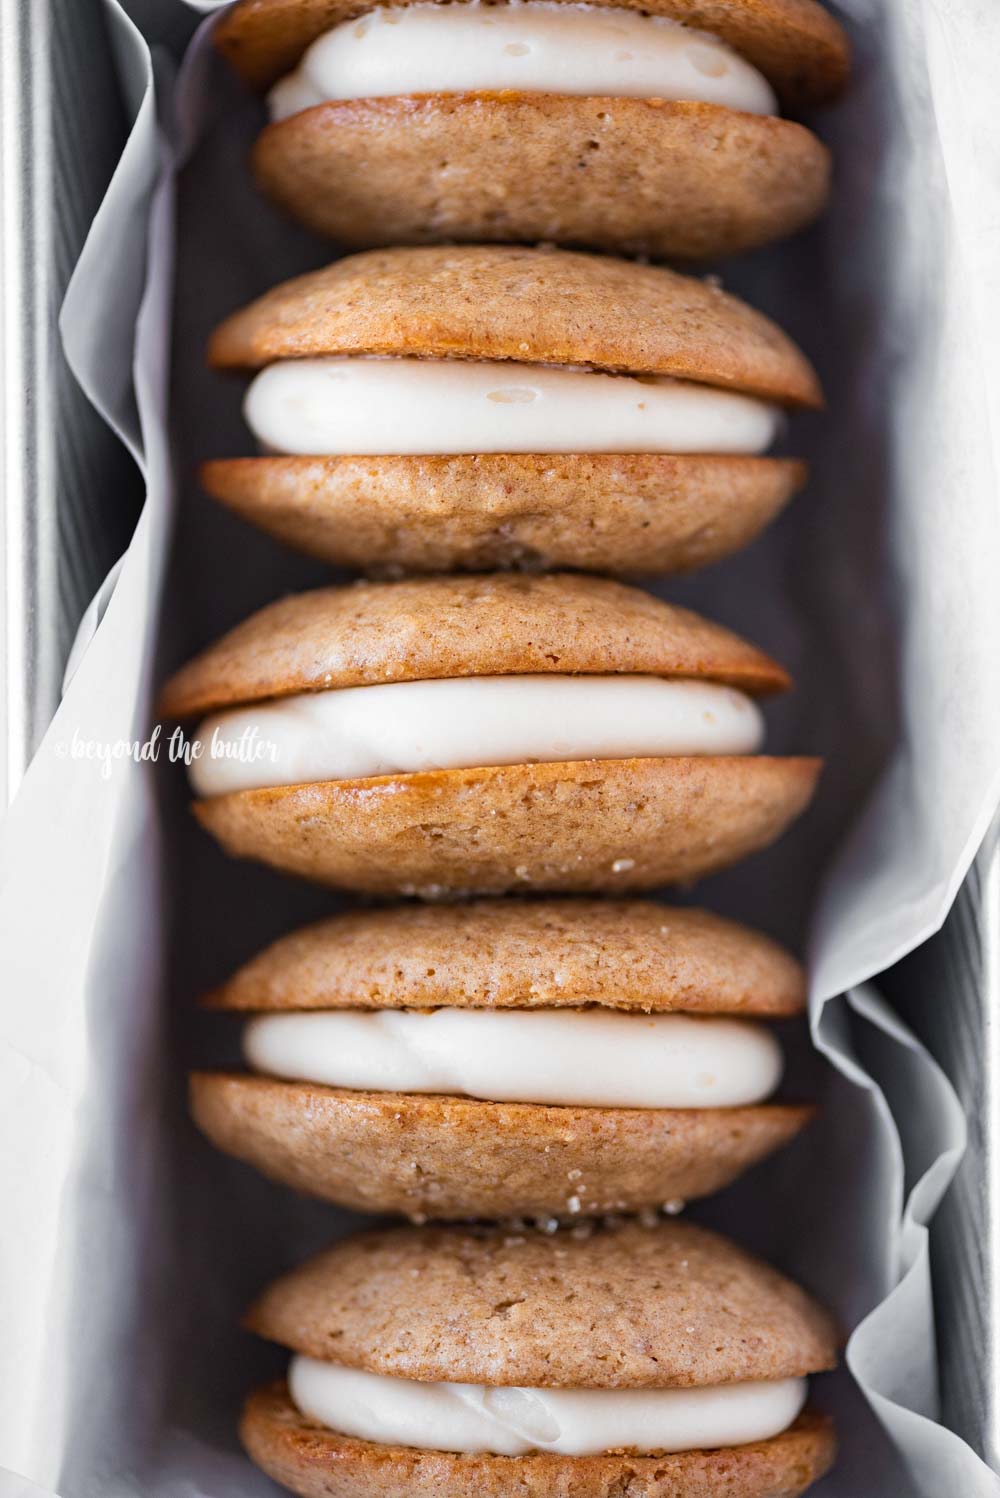 Apple Cider Whoopie Pies | All Images © Beyond the Butter, LLC